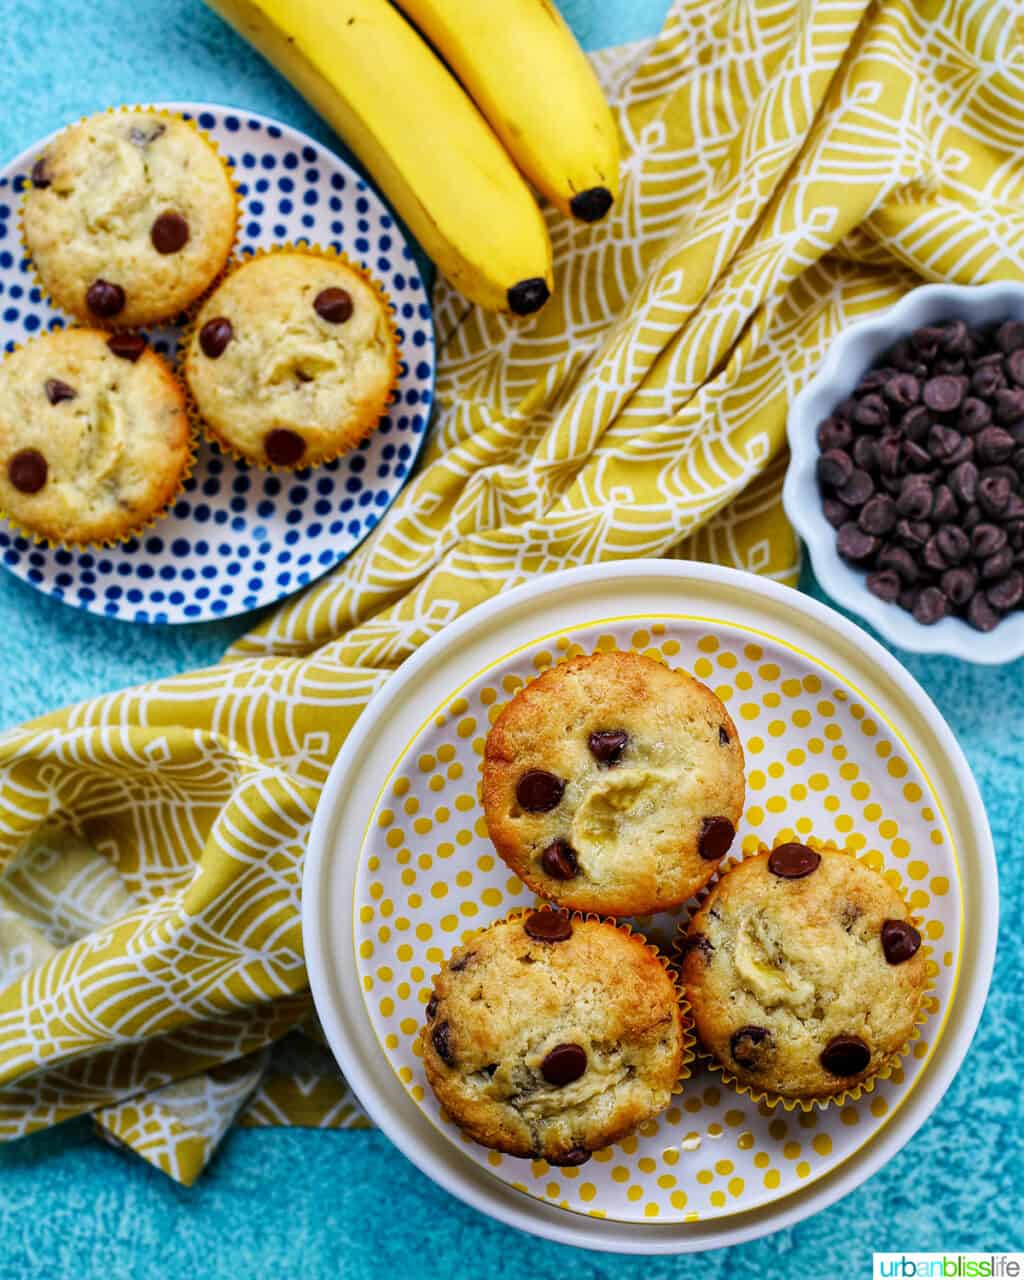 6 banana chocolate chip muffins on two polka dot plates with bananas and chocolate chips on the side.